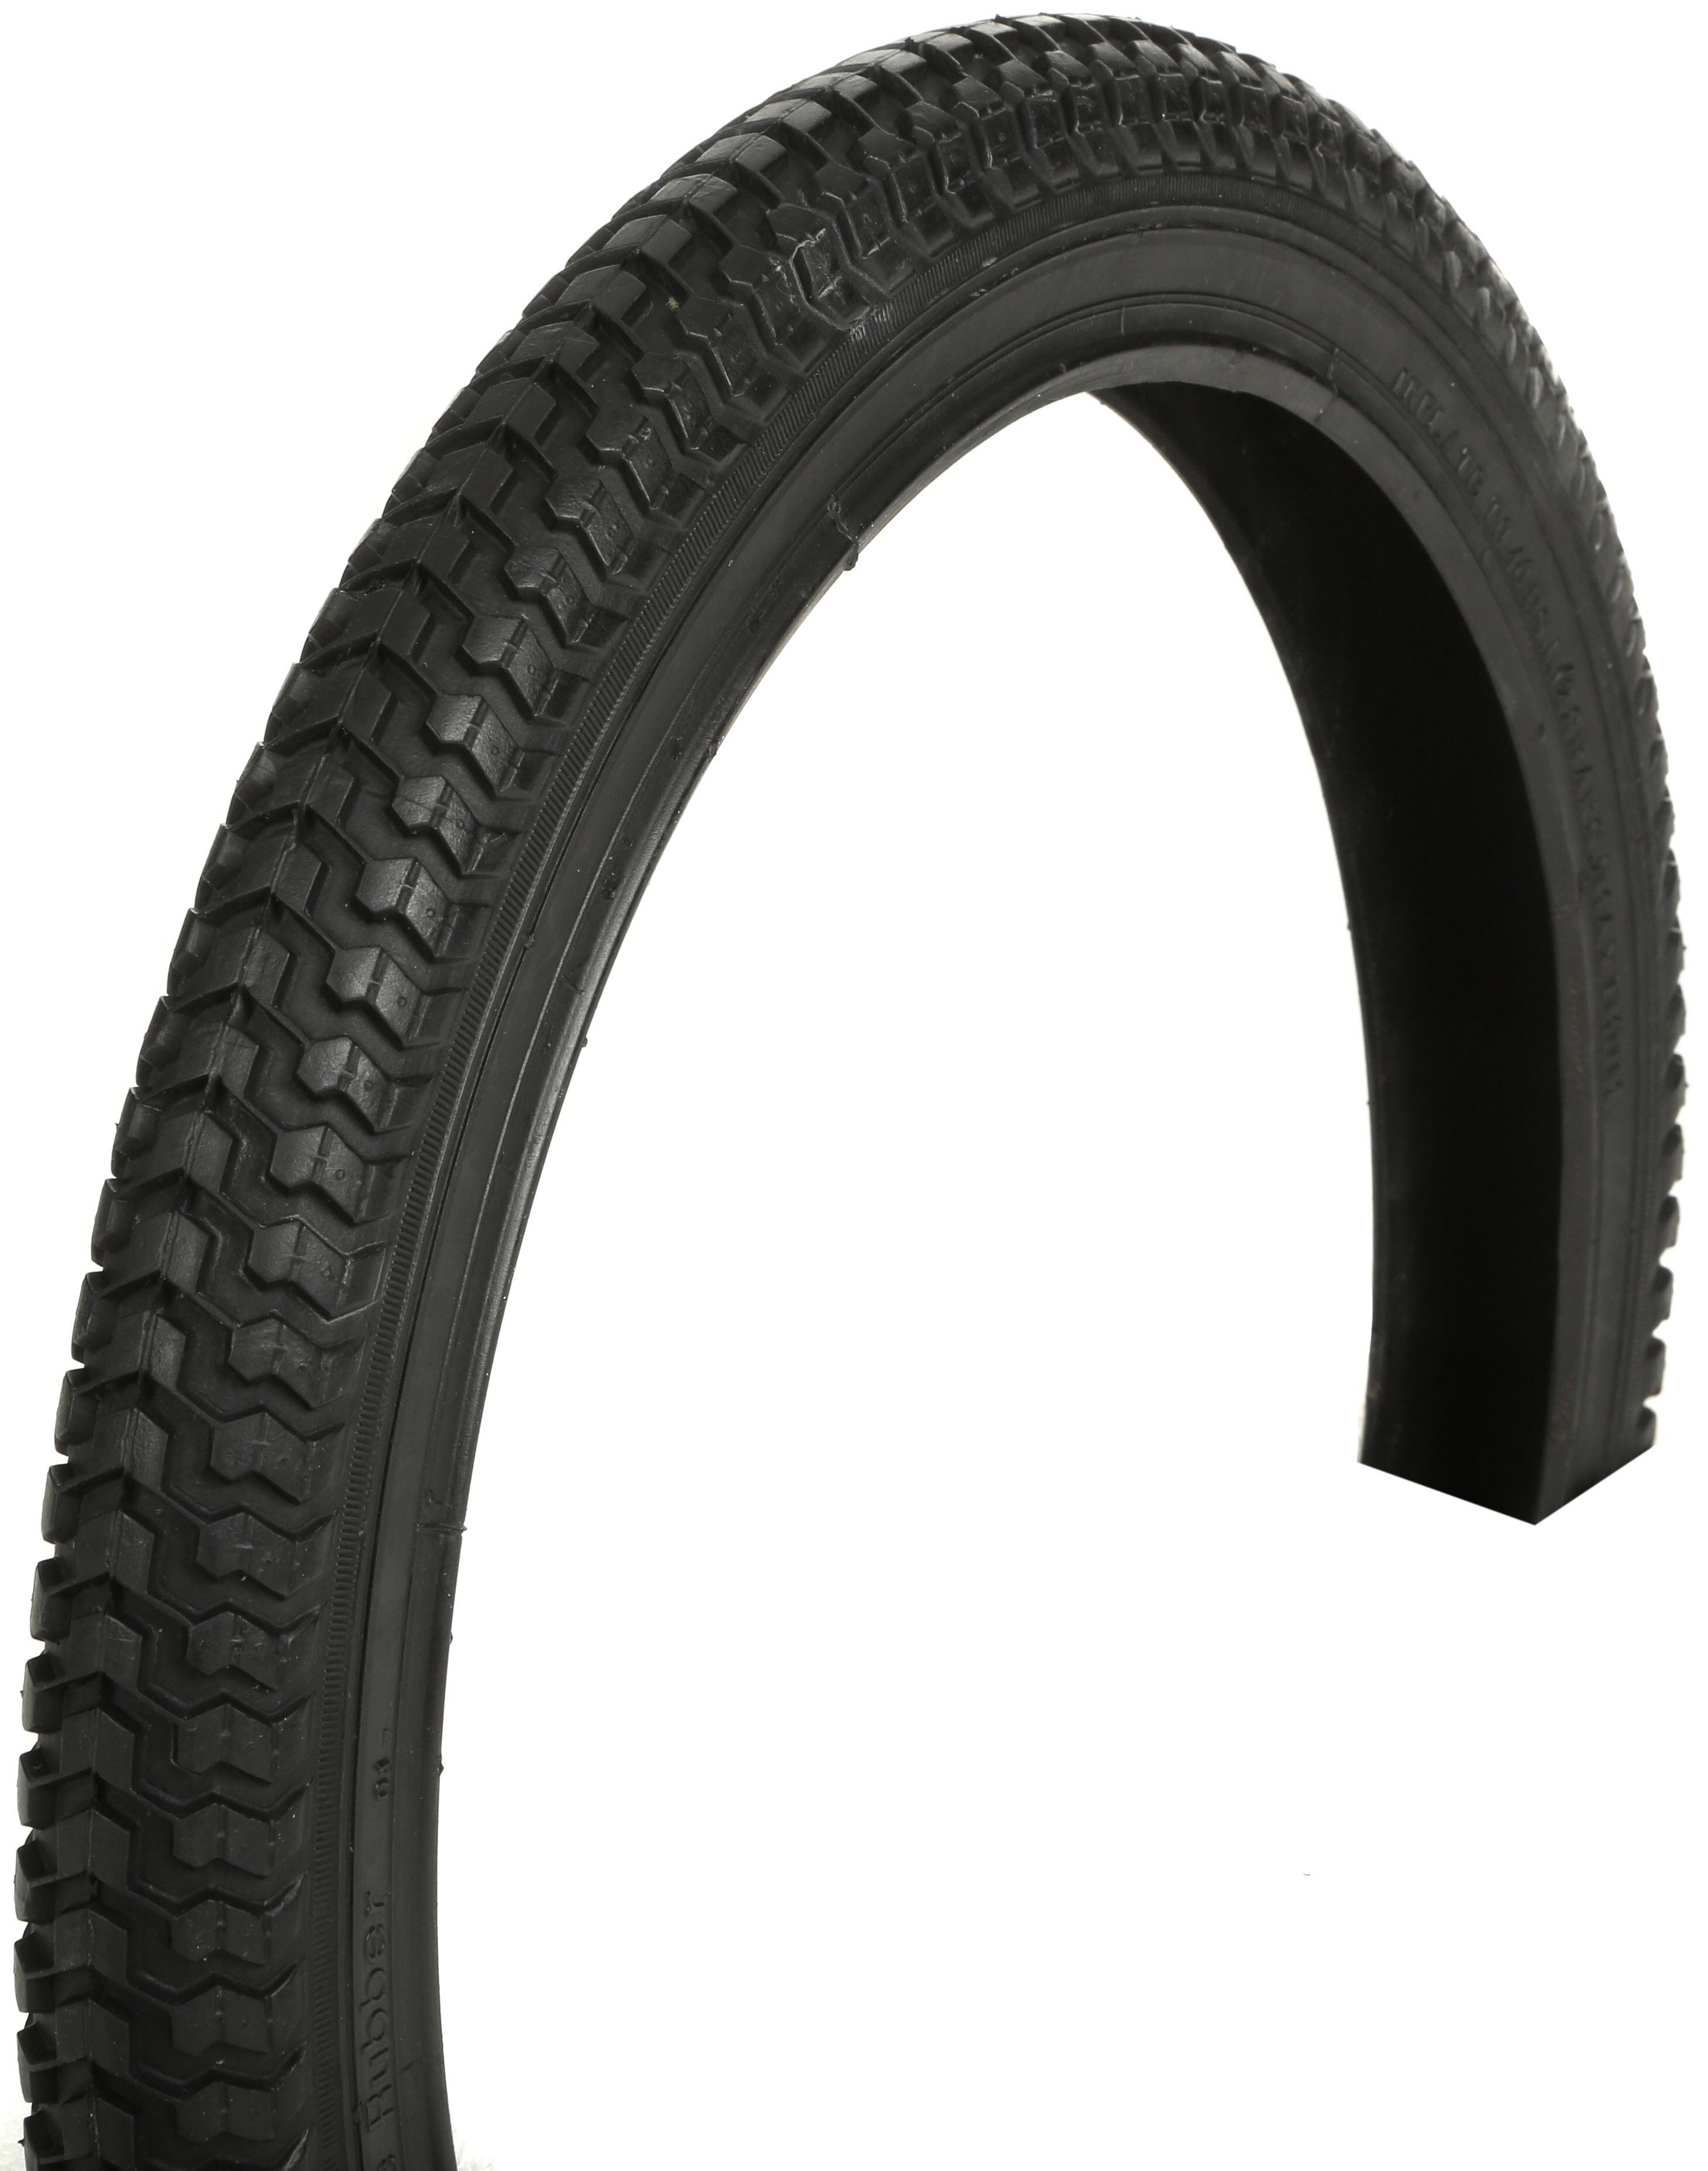 halfords cycle tyres